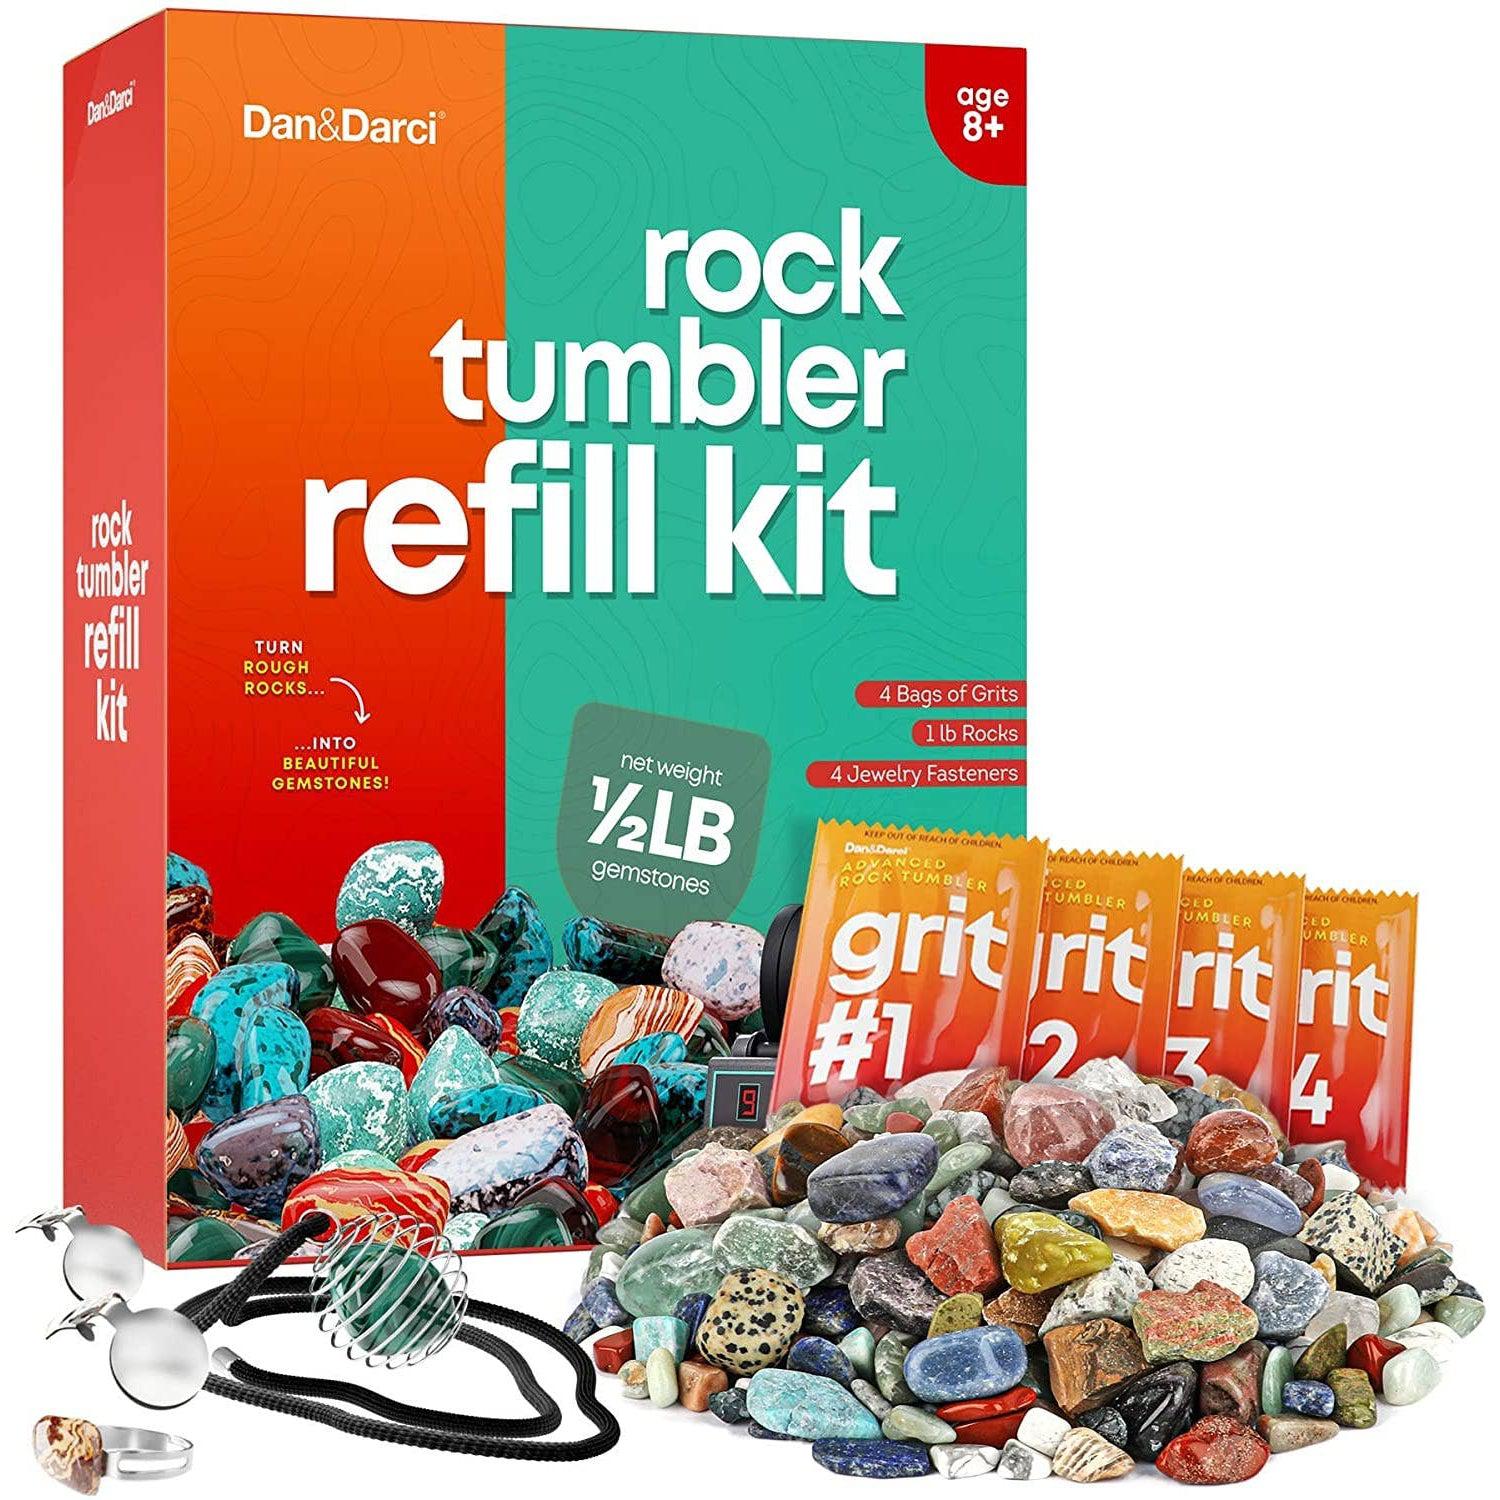 Front view of the Rock Tumbler Refill Kit shown in its box.